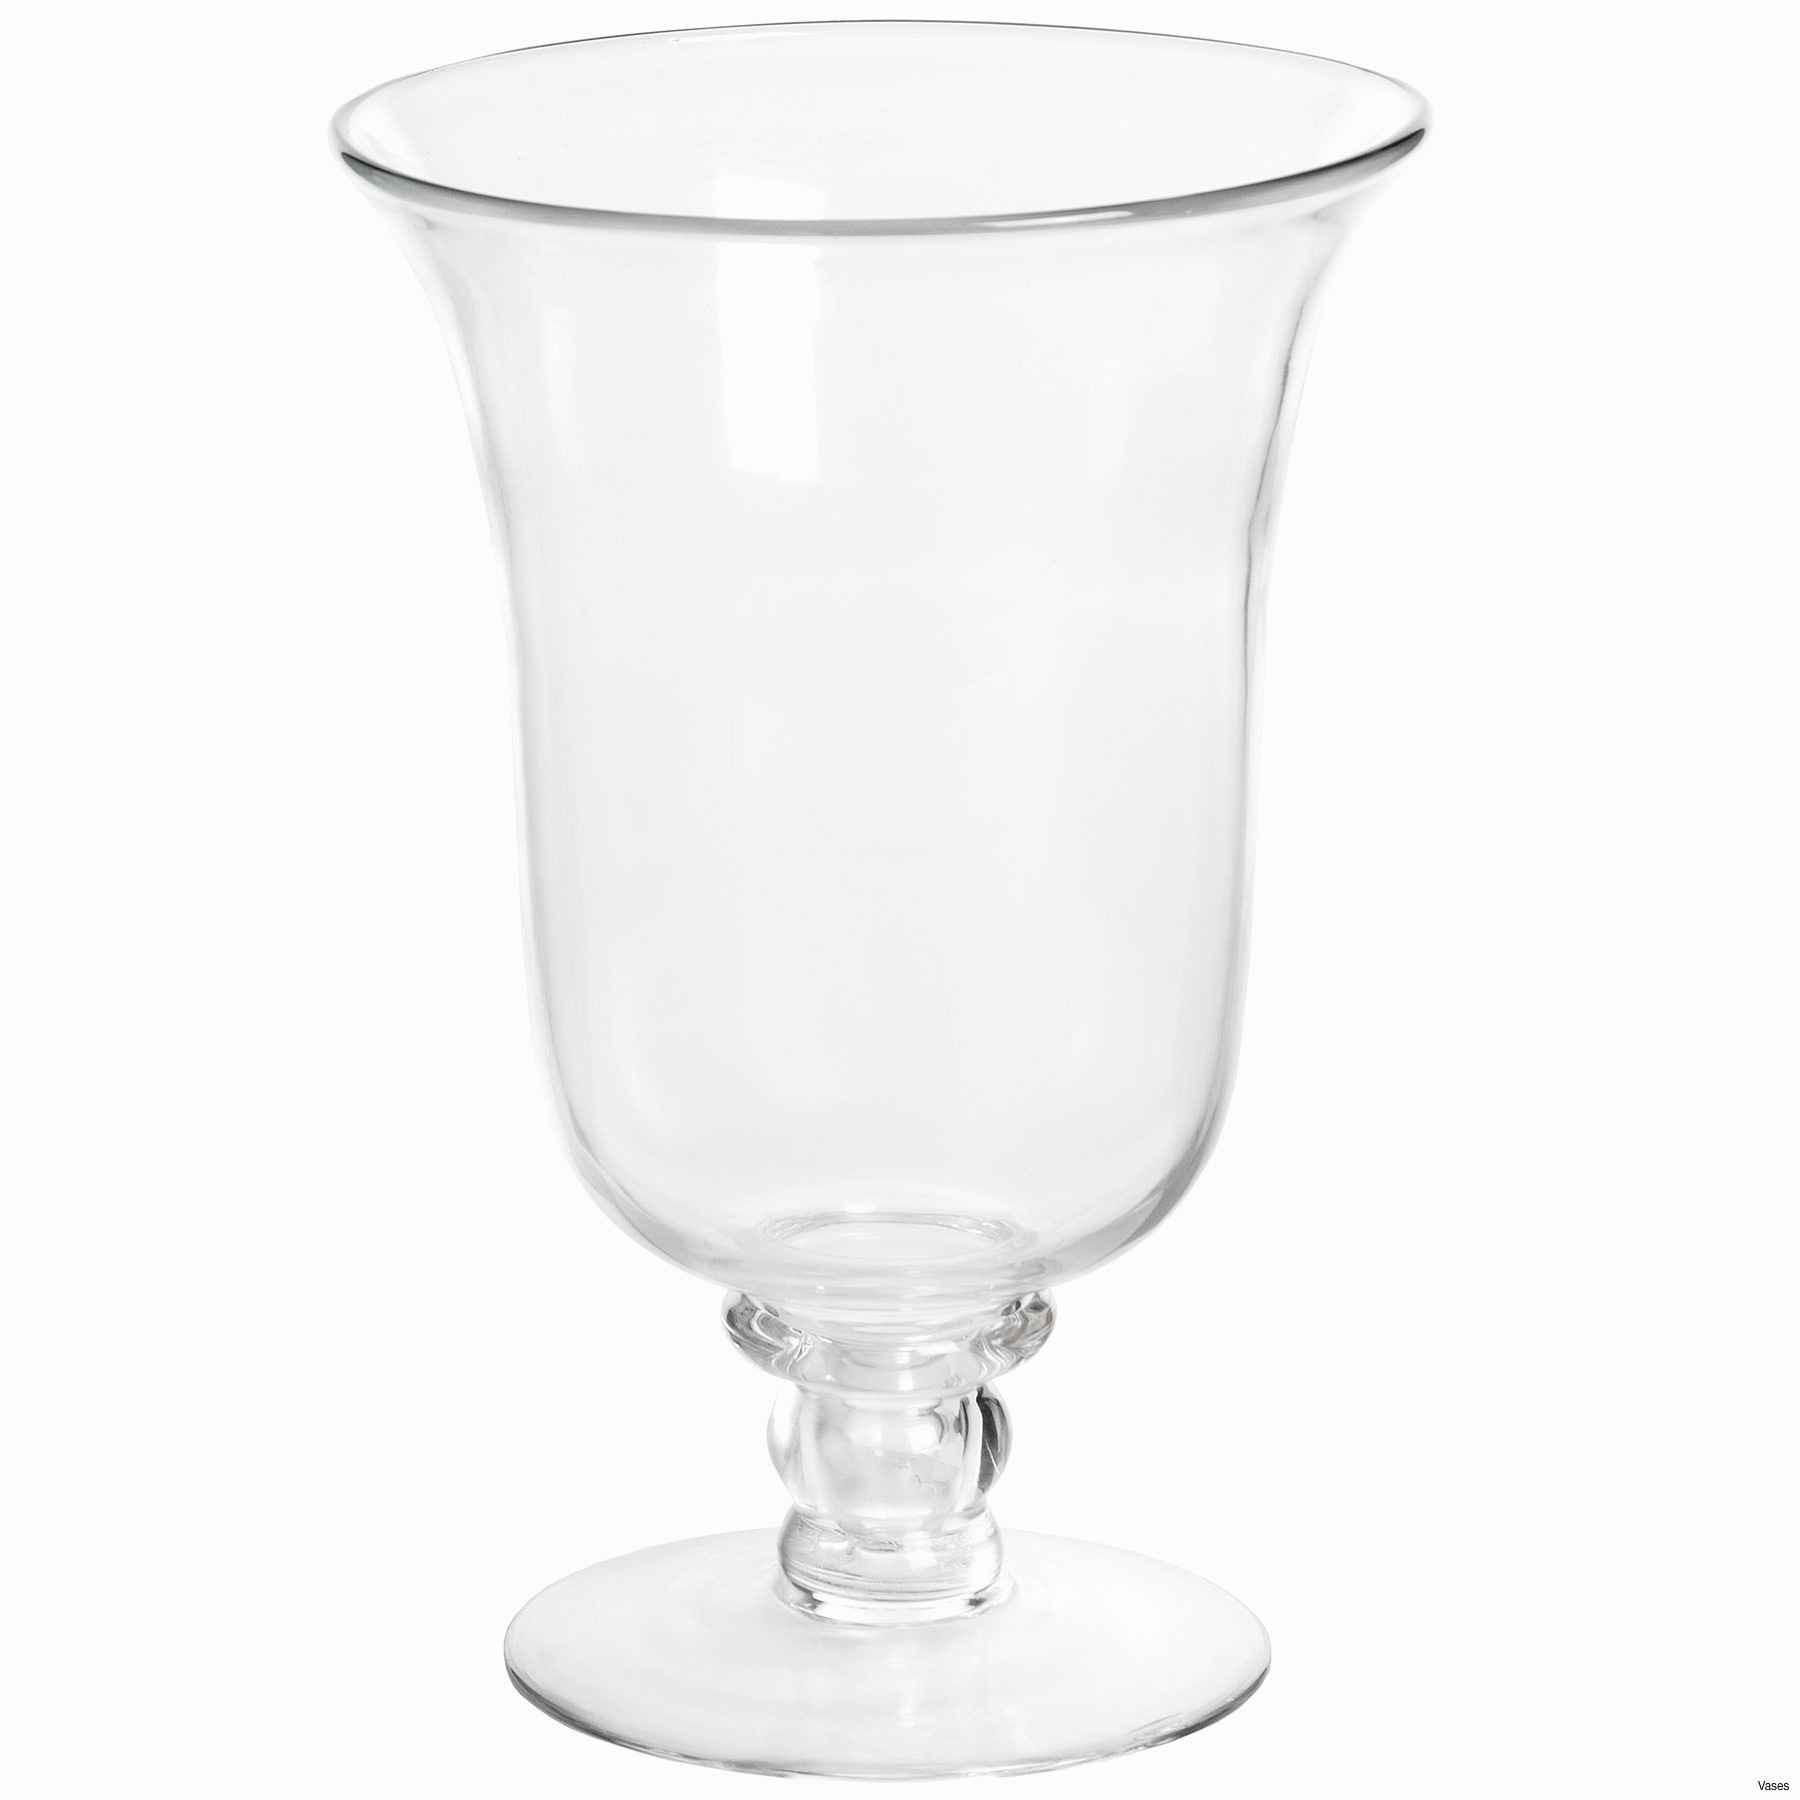 white vases bulk of candle stands wholesale lovely faux crystal candle holders alive inside candle stands wholesale lovely faux crystal candle holders alive vases gold tall jpgi 0d cheap in